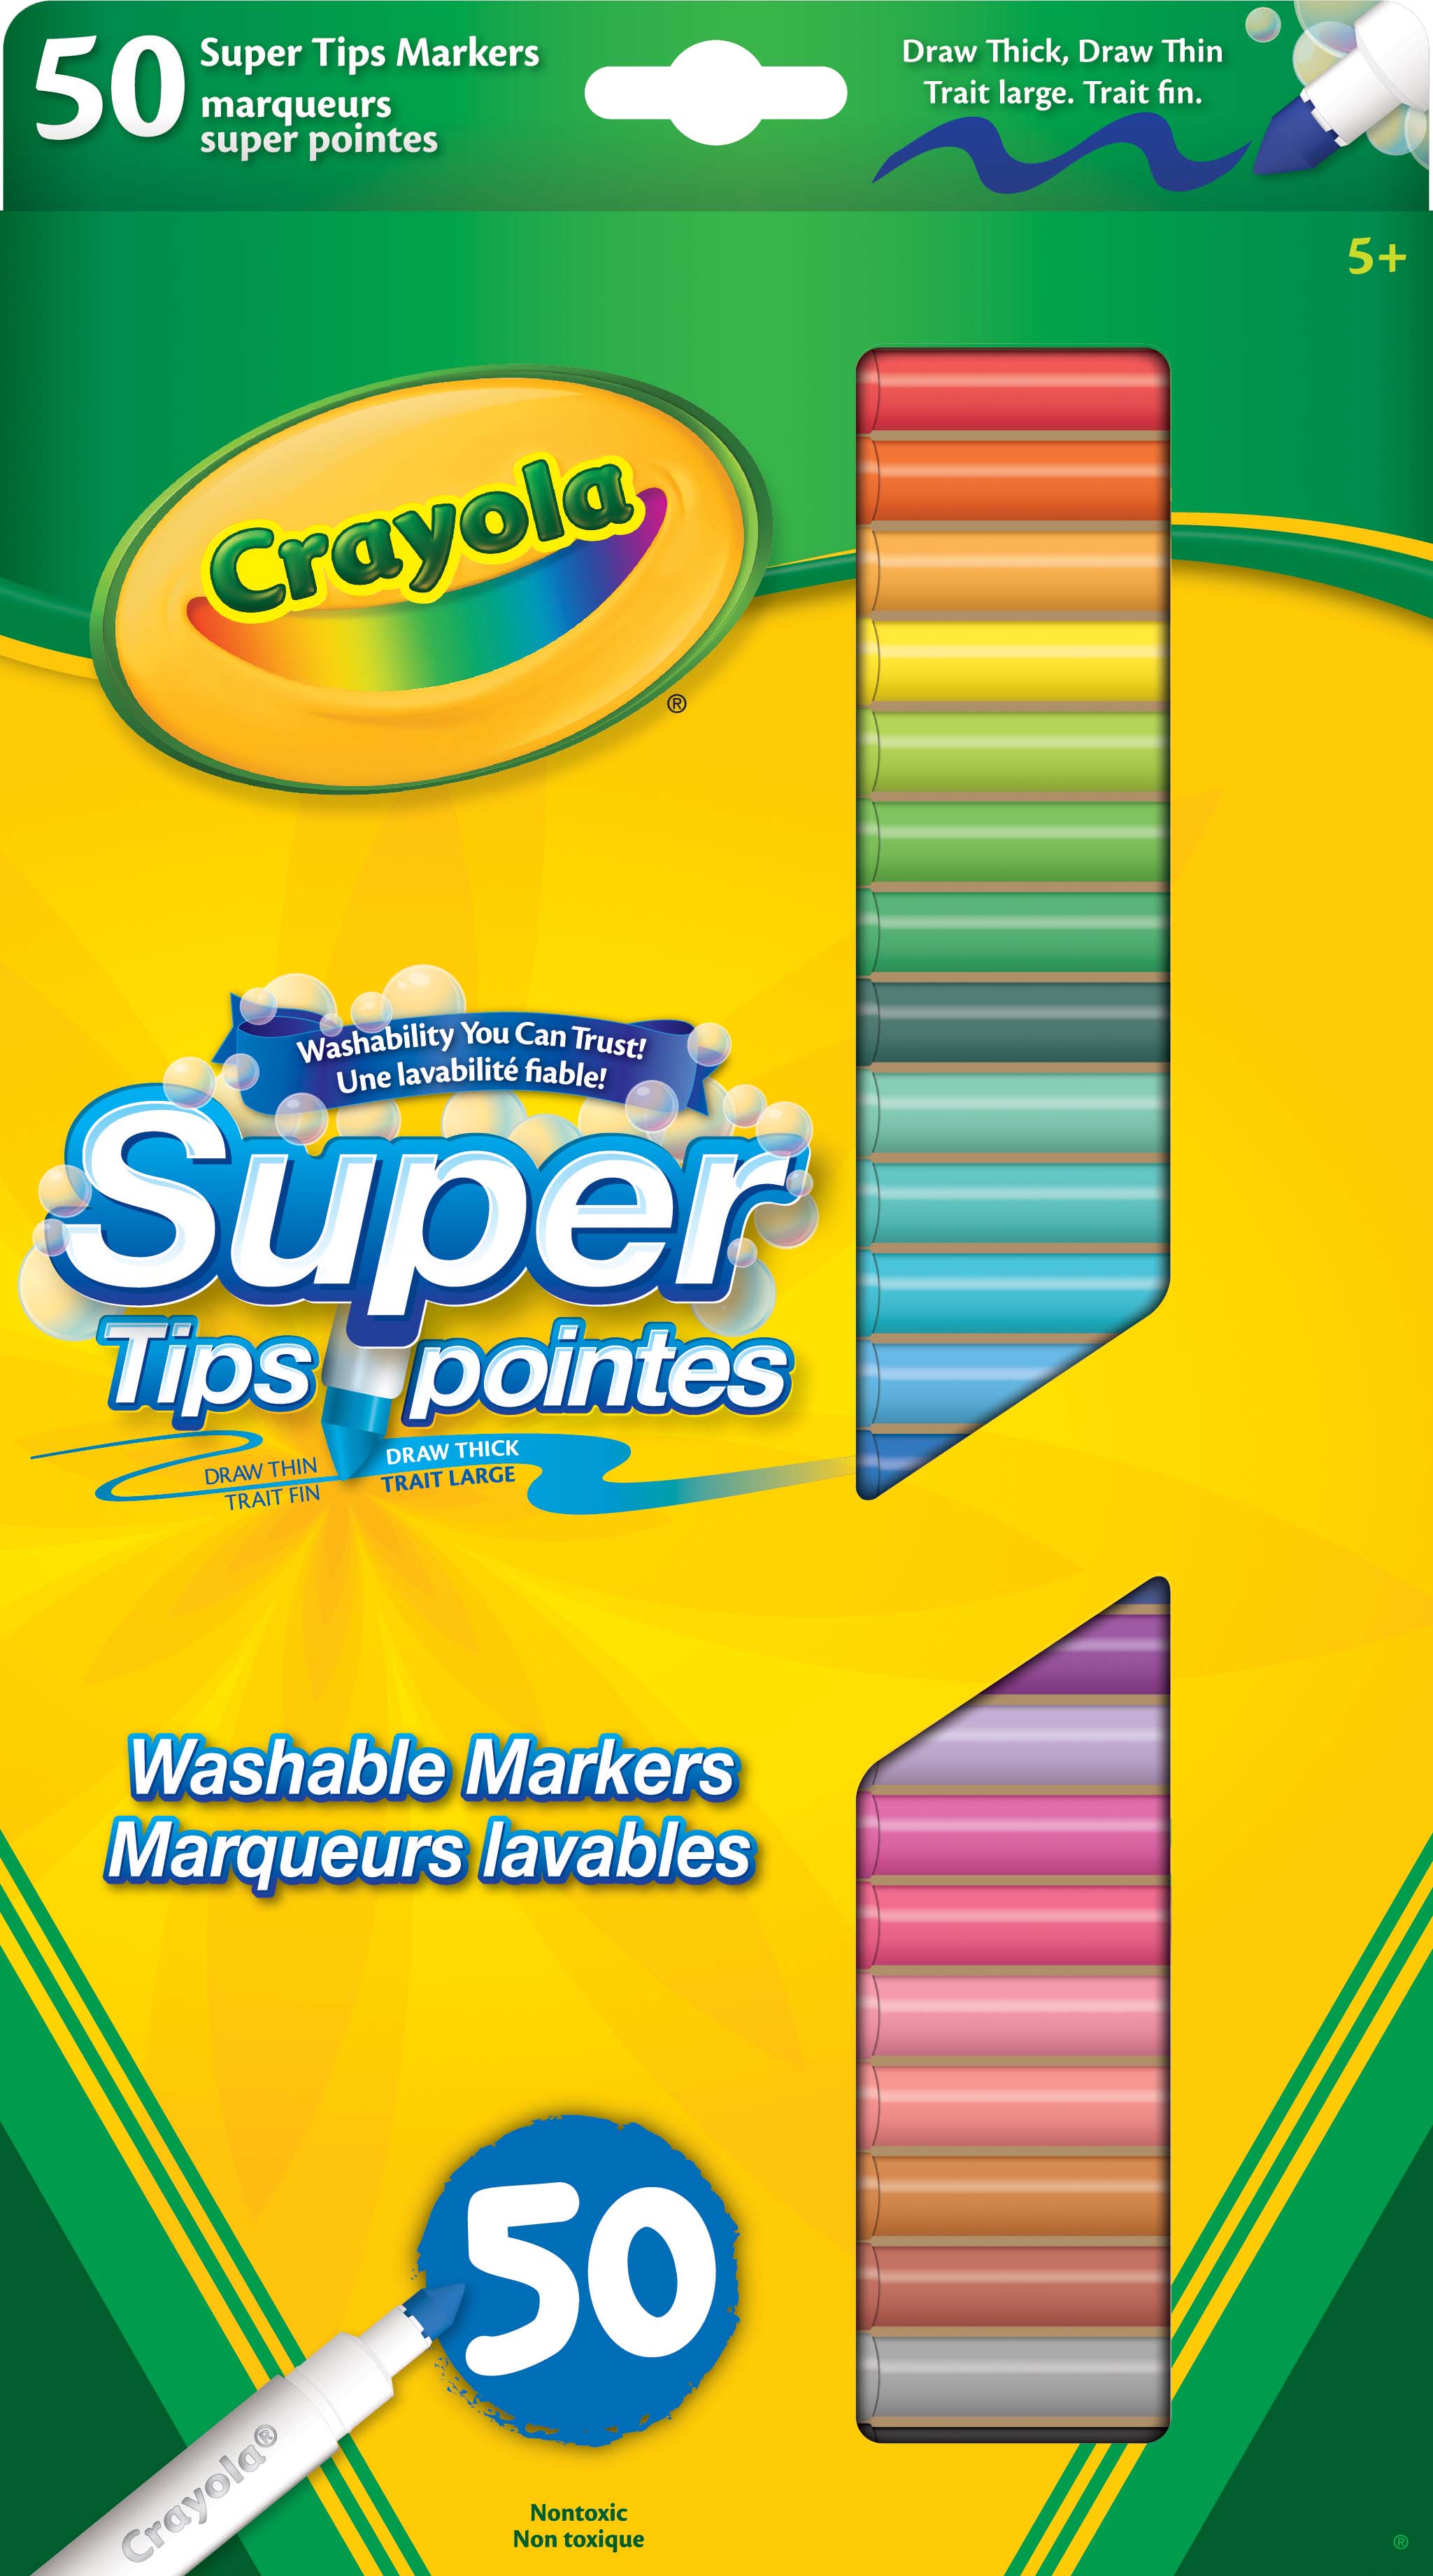 Crayola Colors of the World Fine Line Markers, 24 Count – Crayola Canada